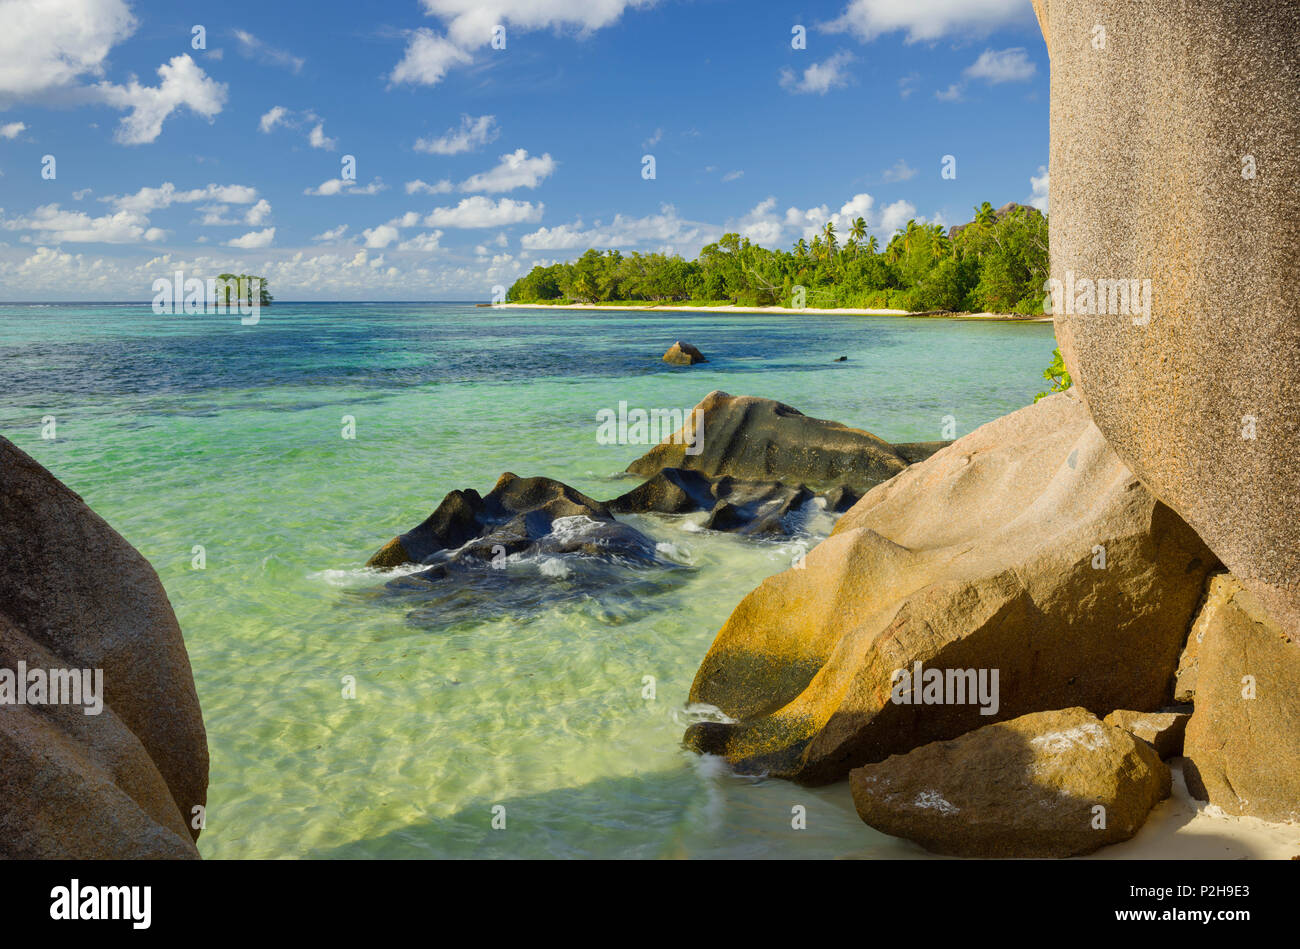 Beach with granite rocks at Anse Source d'Argent, Anse Union, La Digue Island, Seychelles Stock Photo